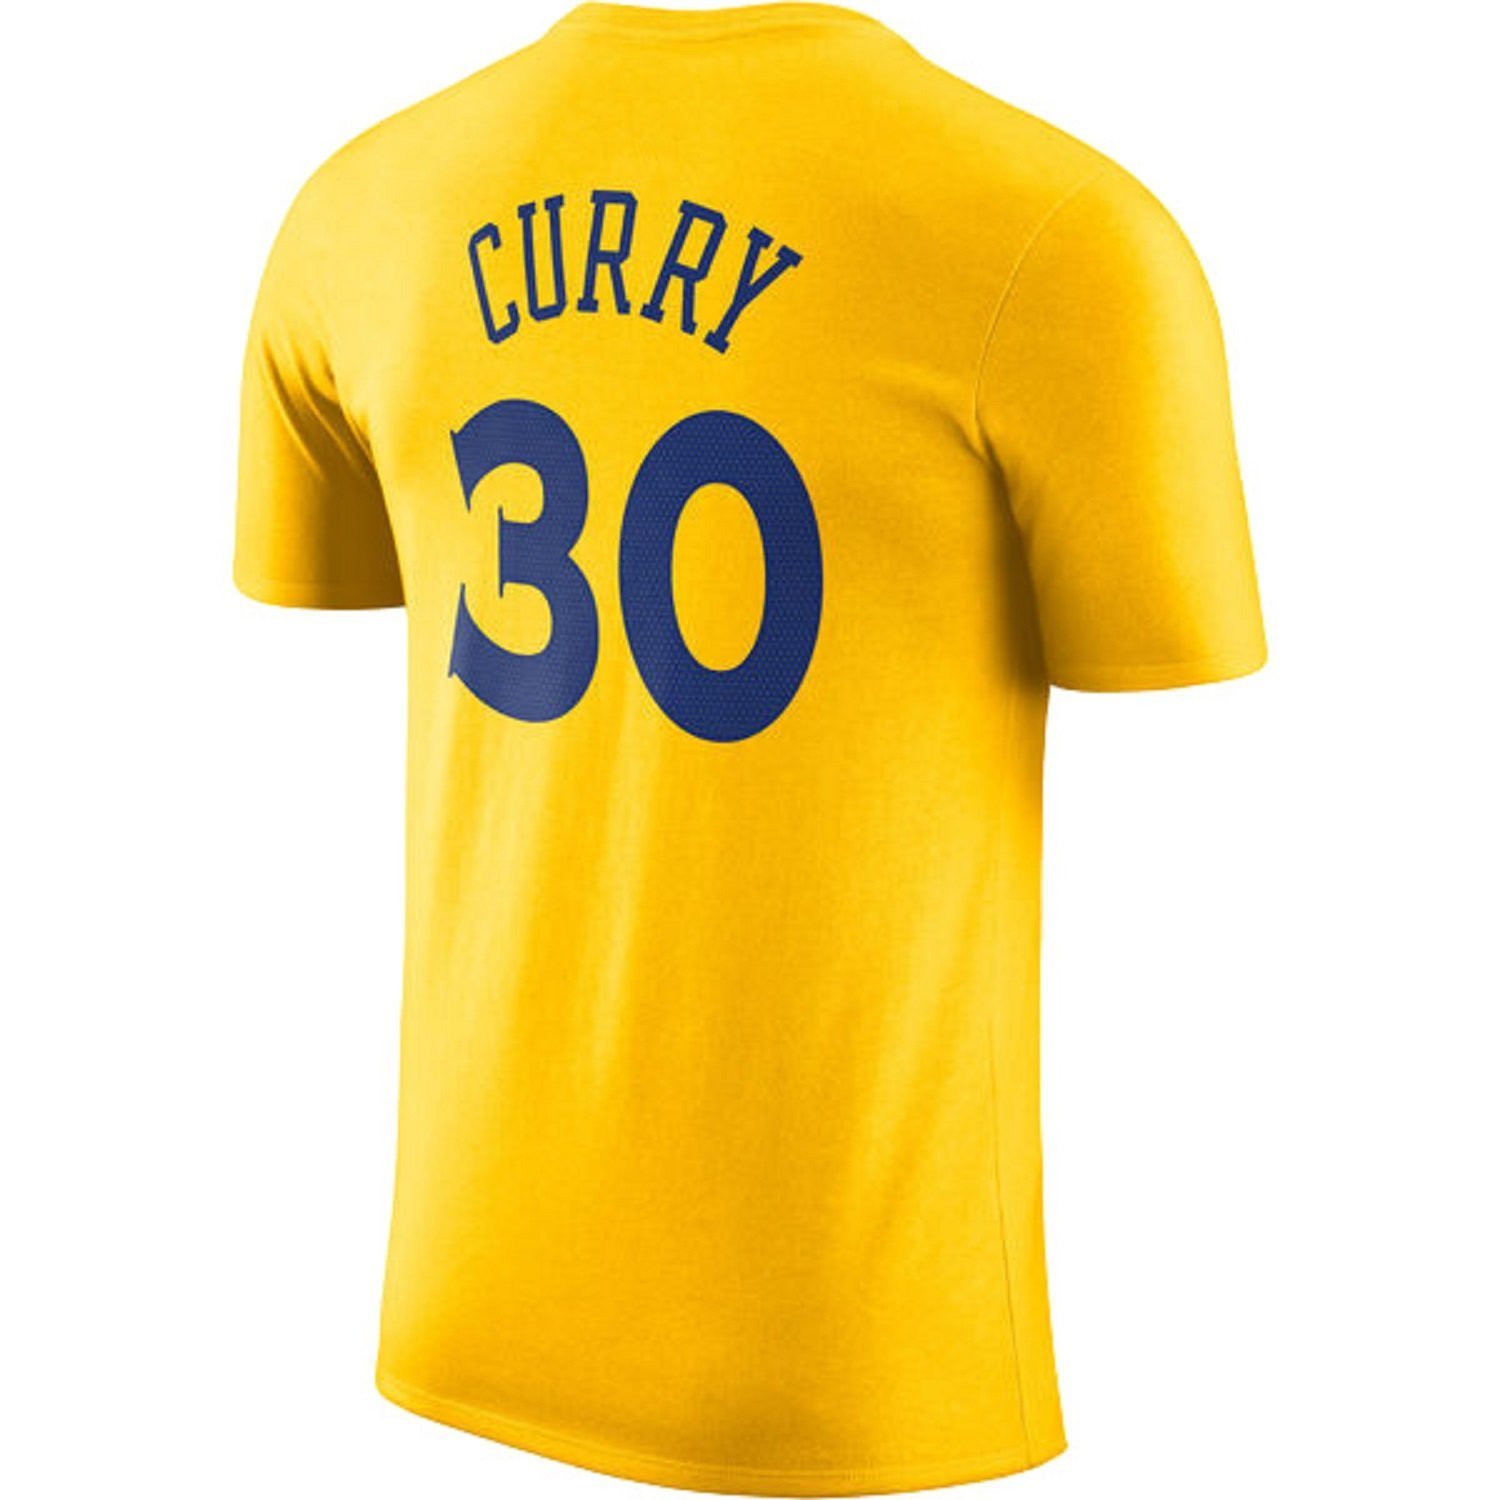 youth size stephen curry jersey